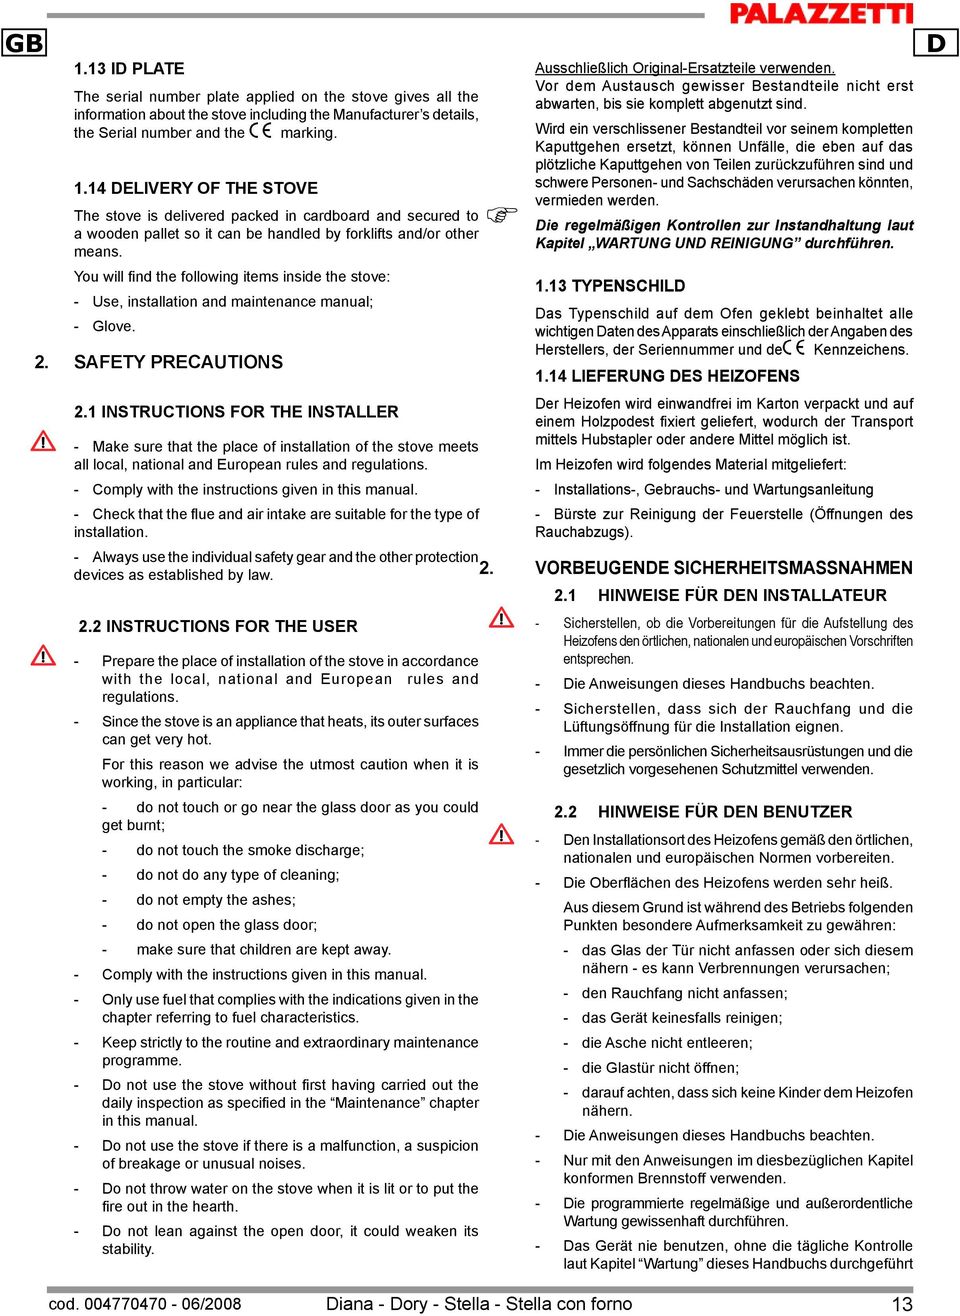 1 Instructions for the installer - Make sure that the place of installation of the stove meets all local, national and European rules and regulations.